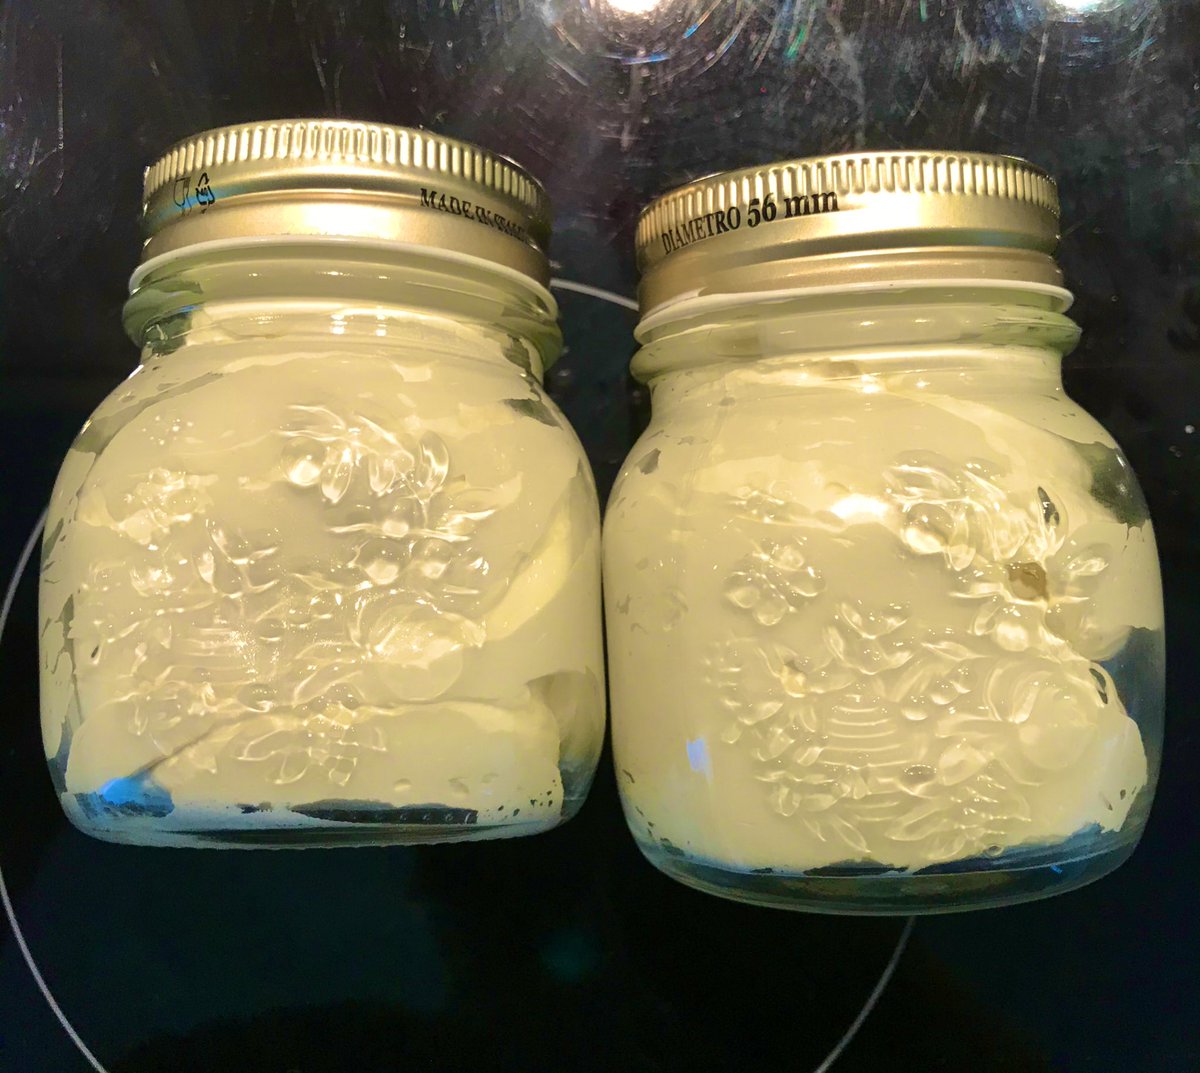 Then put in the body butter in a glass, screw on container and store well. I used a piping bag to get it in jars.